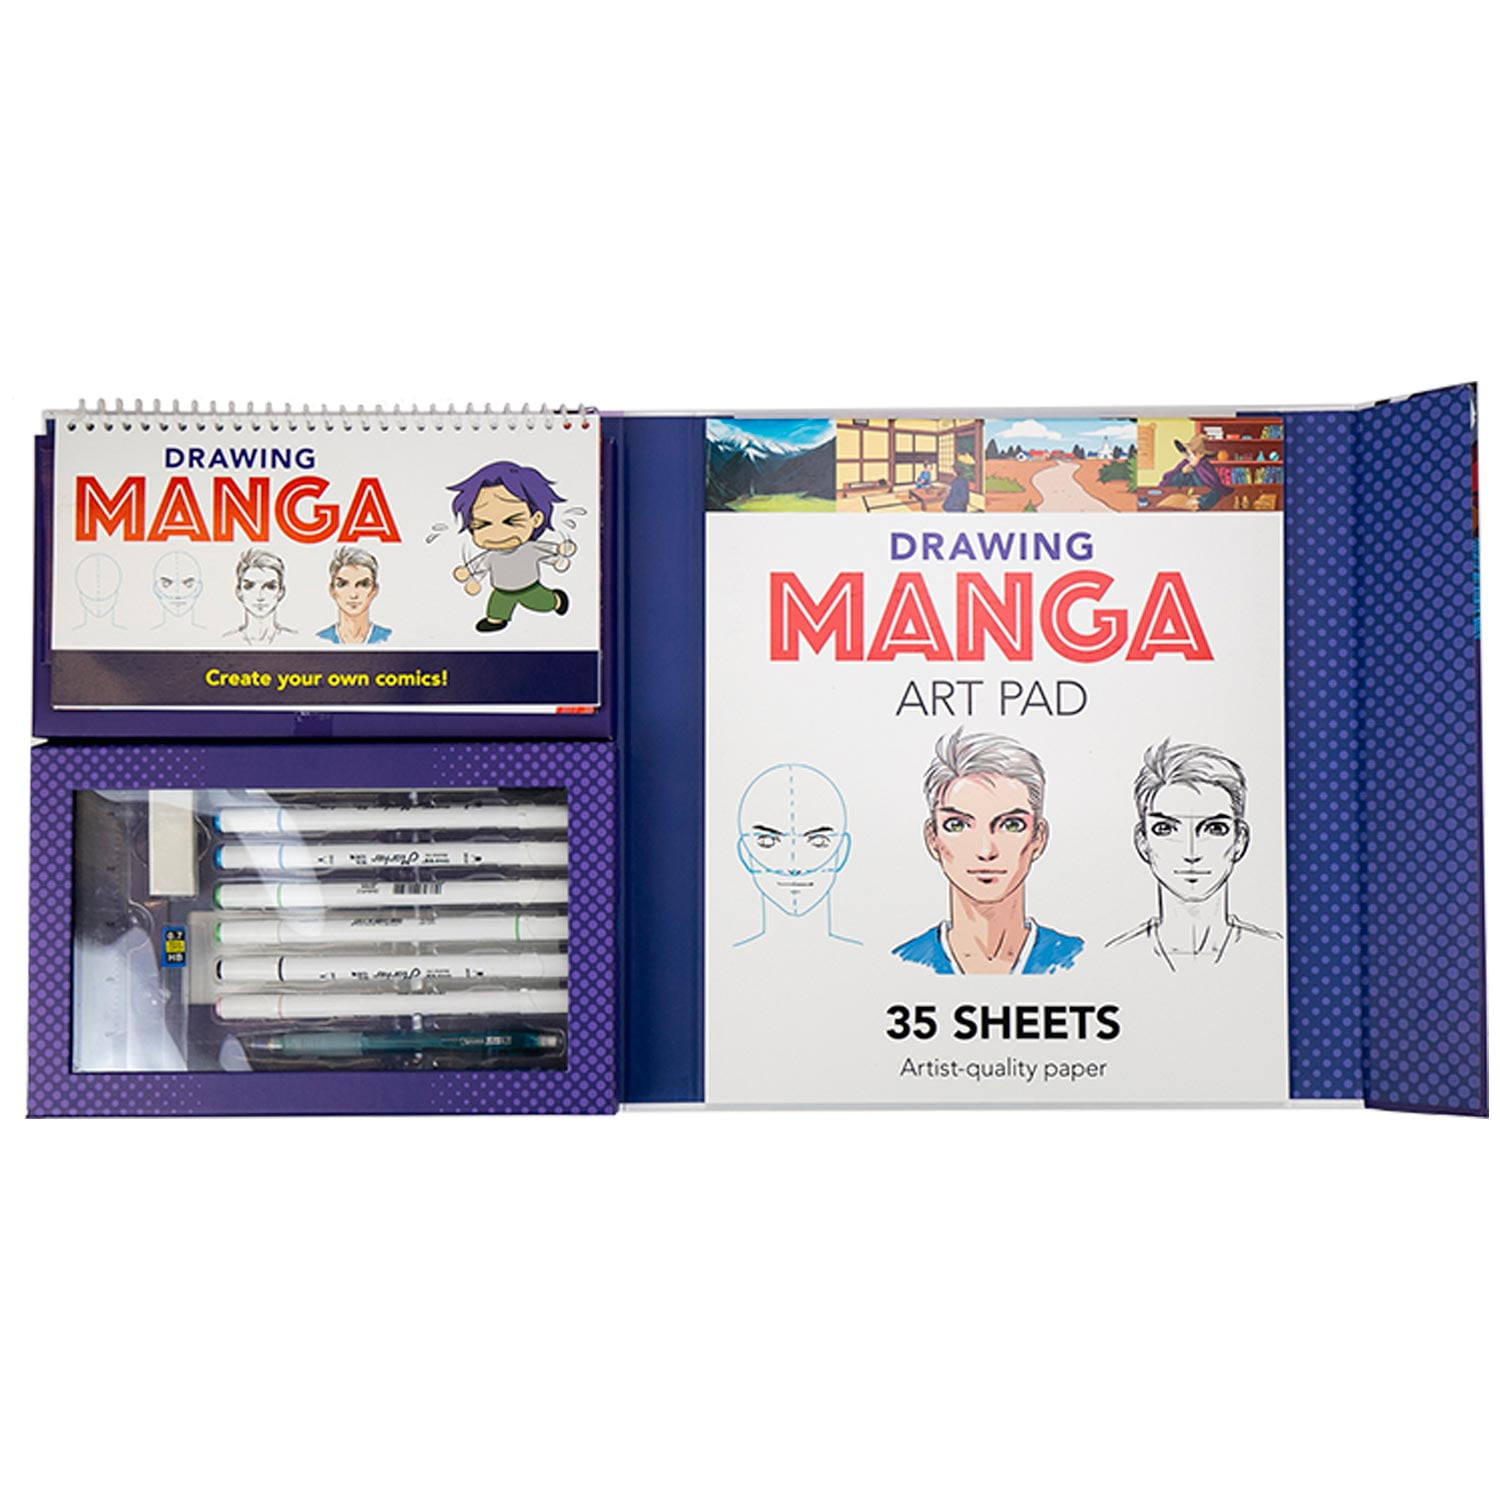 Unboxing Complete Manga Drawing Kit.mpg 